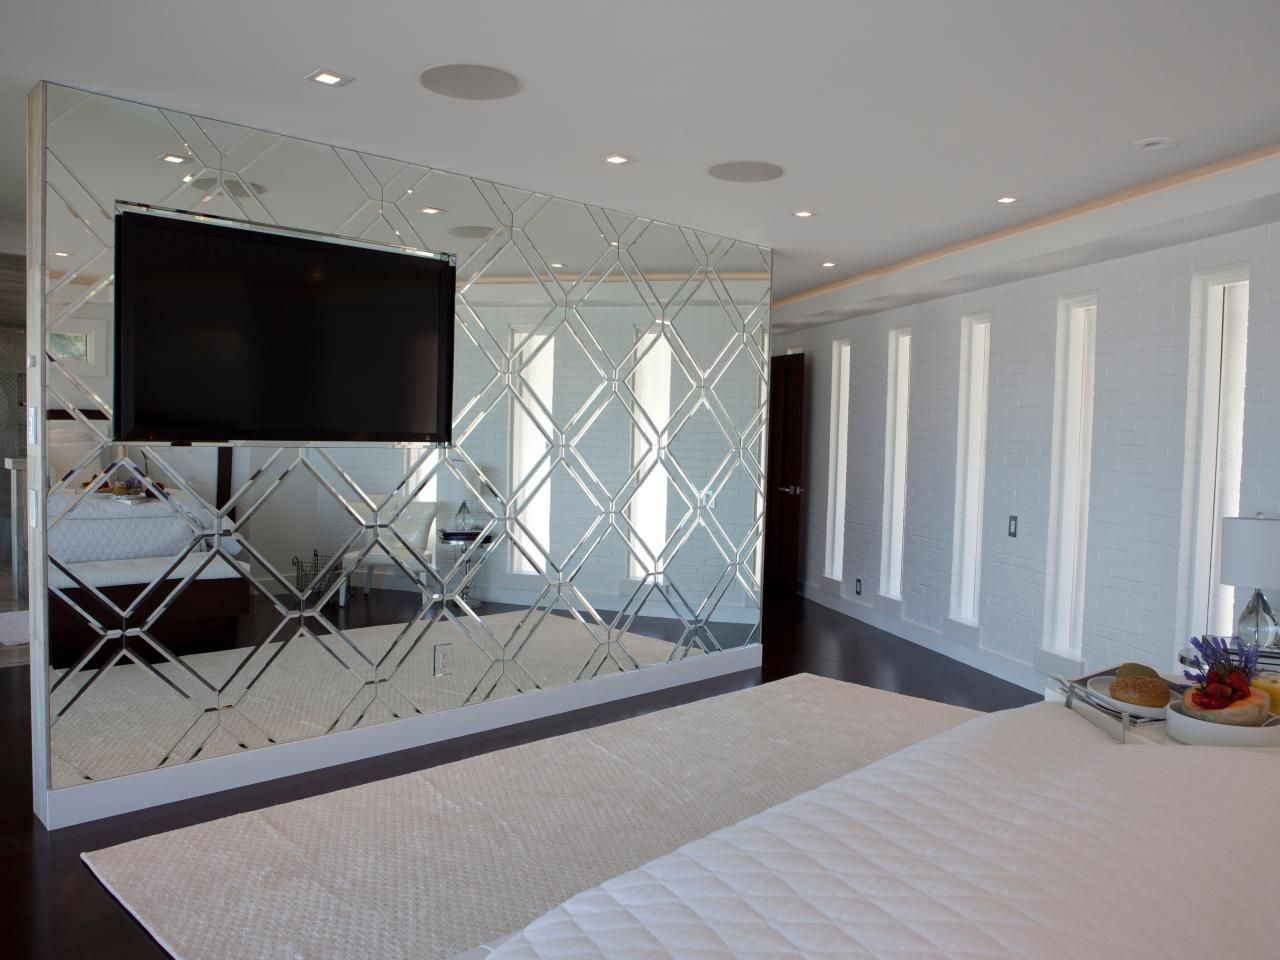 Well Known Bedroom Wall Mirror Houzz Design Ideas Bathroom Mirrors Simple Pertaining To Wall Mirrors For Bedroom (View 7 of 20)